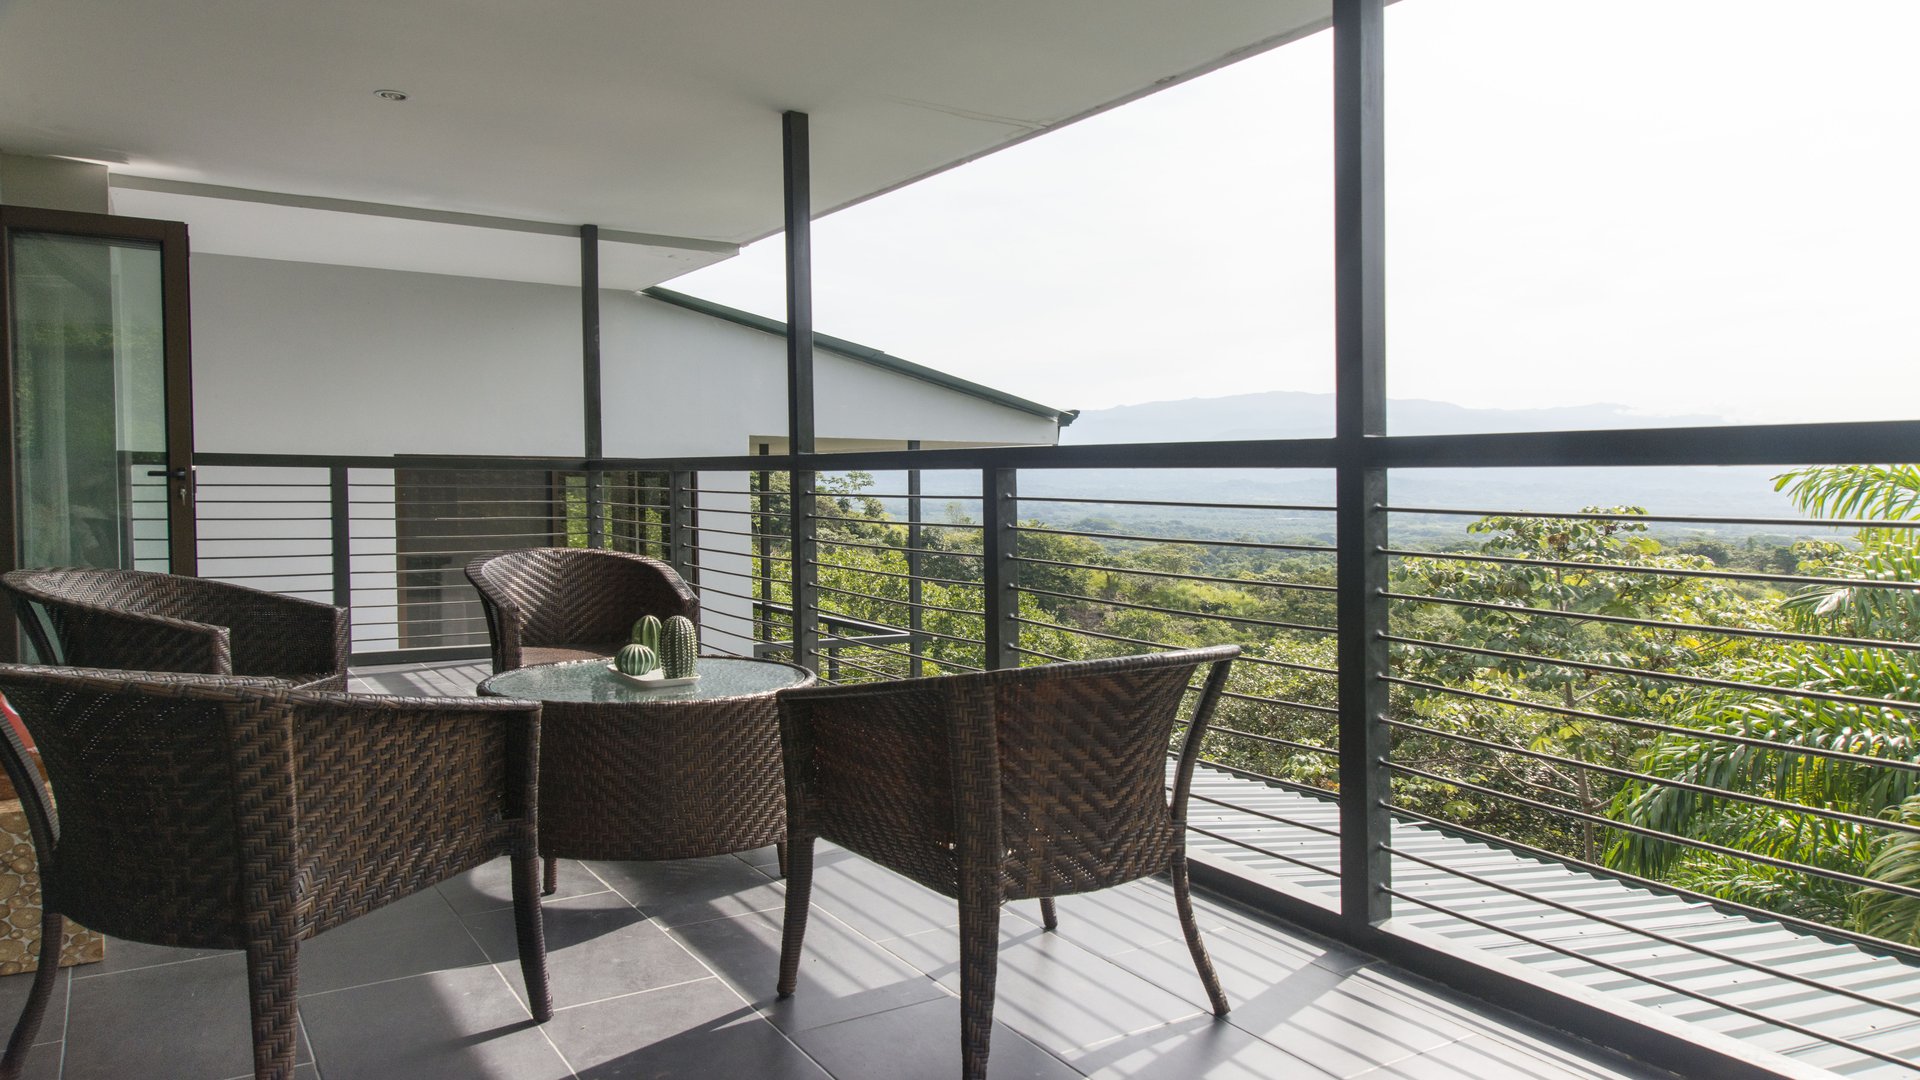 Get back to nature and the natural wonderment of Manuel Antonio from the balconies on every level of the Manuel Antonio vacation home.